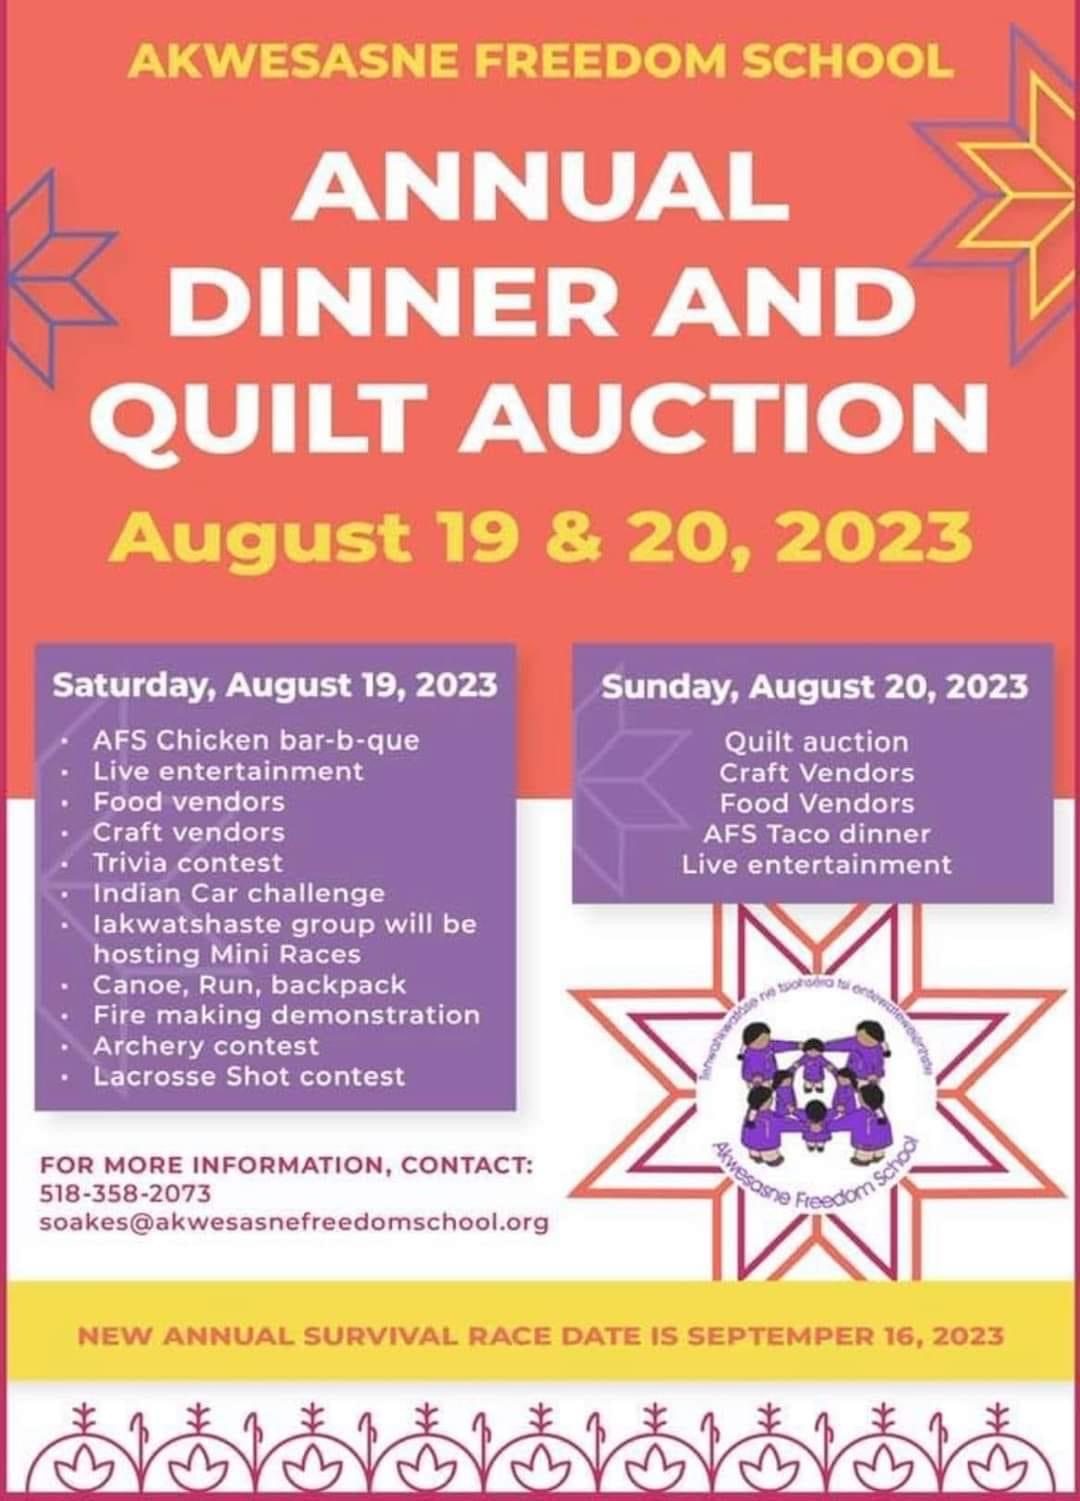 Akwesasne Freedom School Annual Dinner and Quilt Auction Aug 19-20, 2023